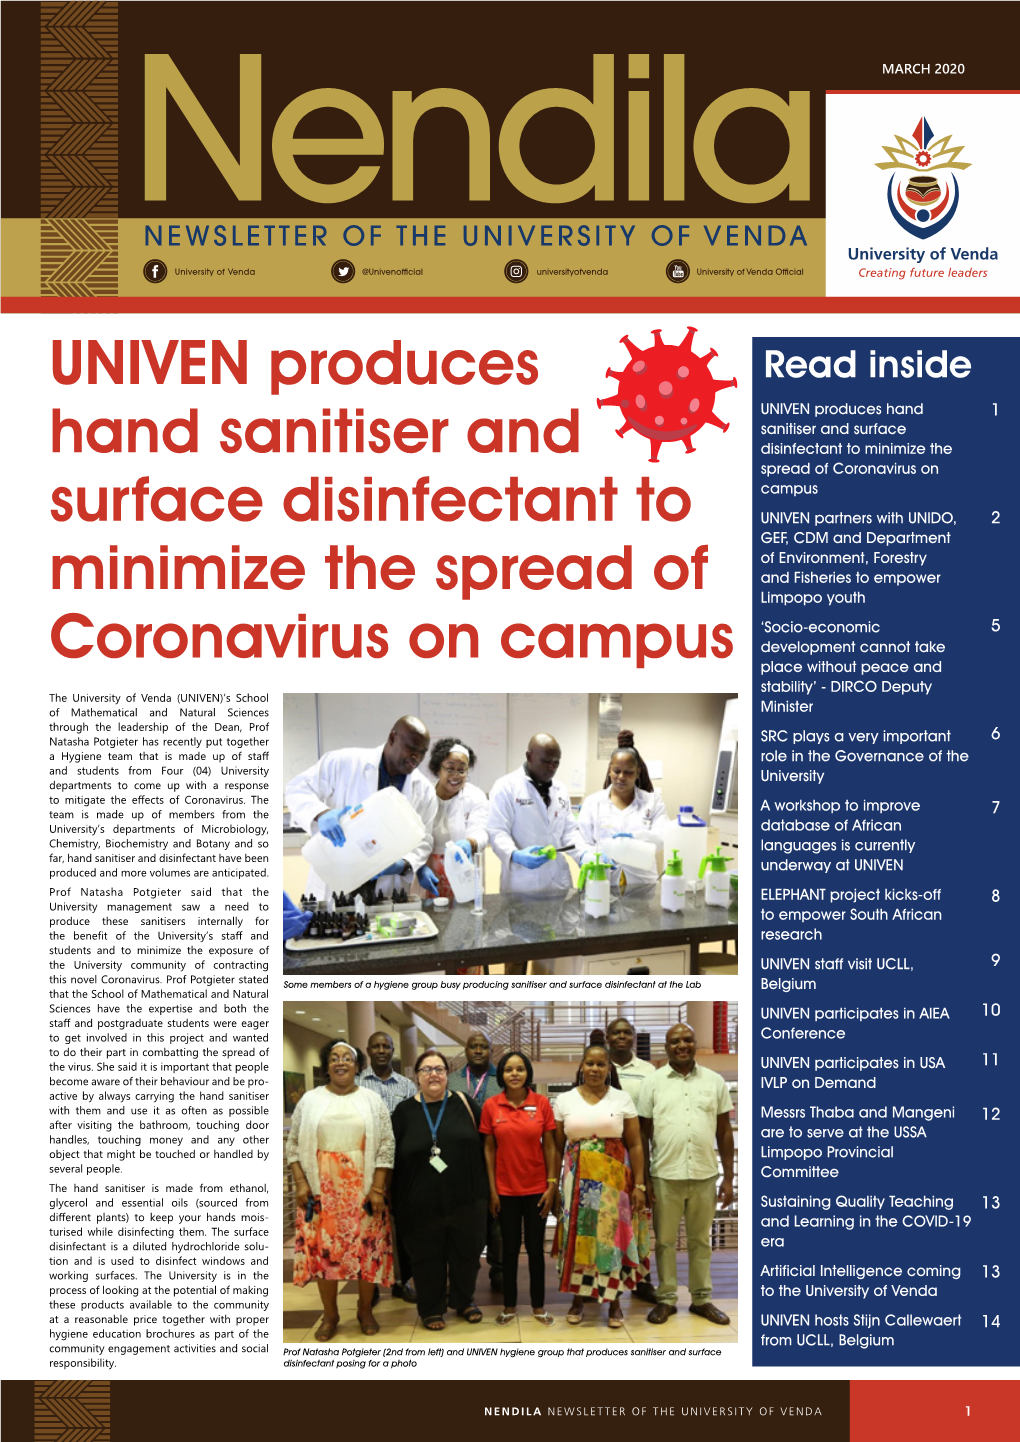 UNIVEN Produces Hand Sanitiser and Surface Disinfectant to Minimize the Spread of Coronavirus on Campus